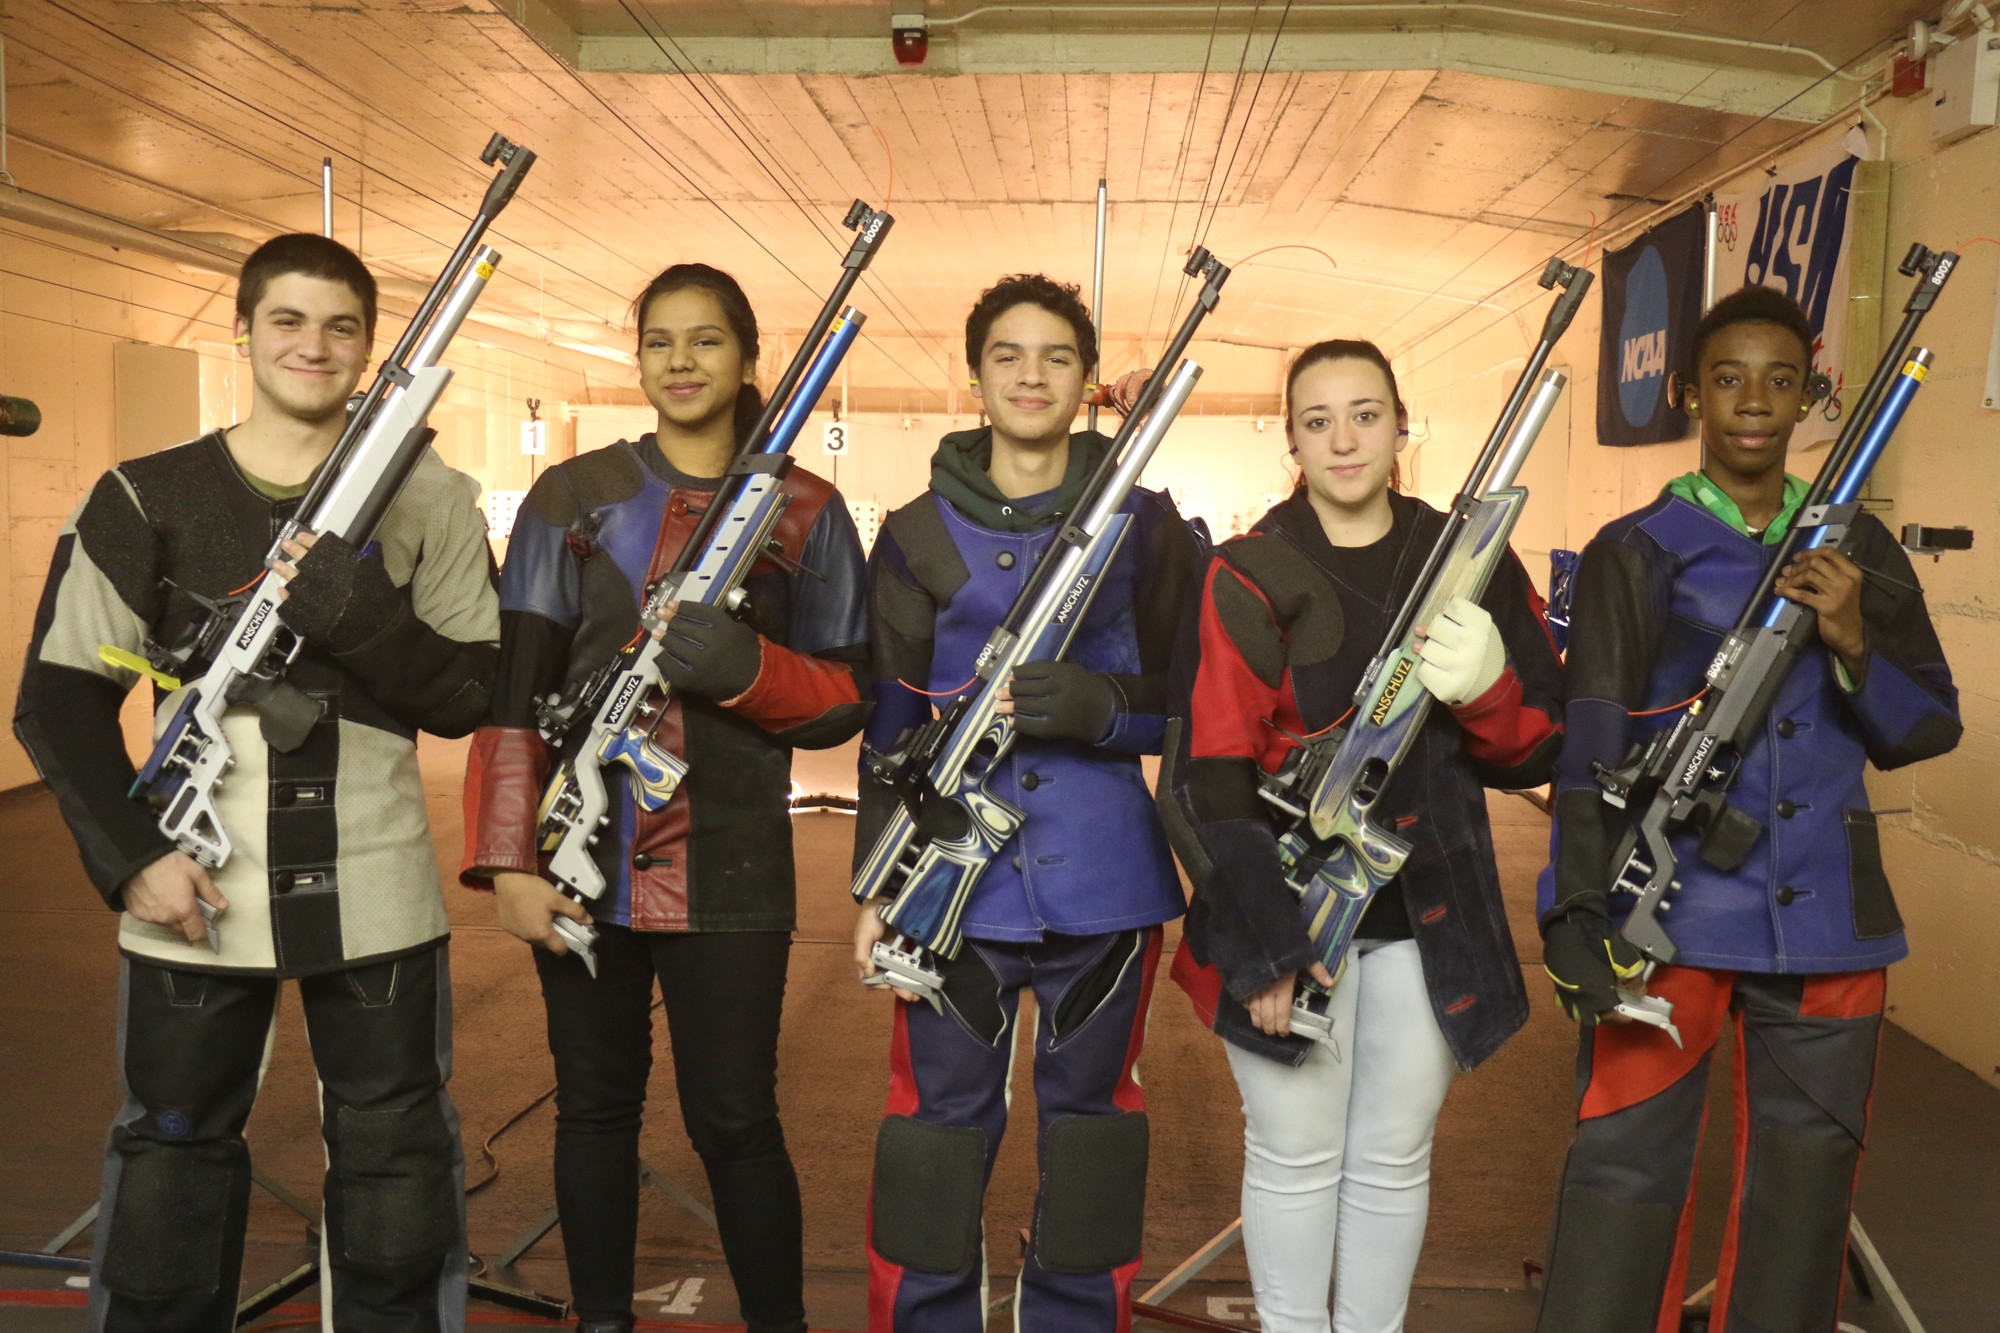 The team placed second in the state on Feb. 27. From left were senior Neil Aliventi, 17; senior Jennifer Bhatti, 17; junior Nicholas Reyes, 17; junior Nicole Sarro, 17; and sophomore Zefanyah McDonald, 15. McDonald earned the third-highest score in the state for an individual.